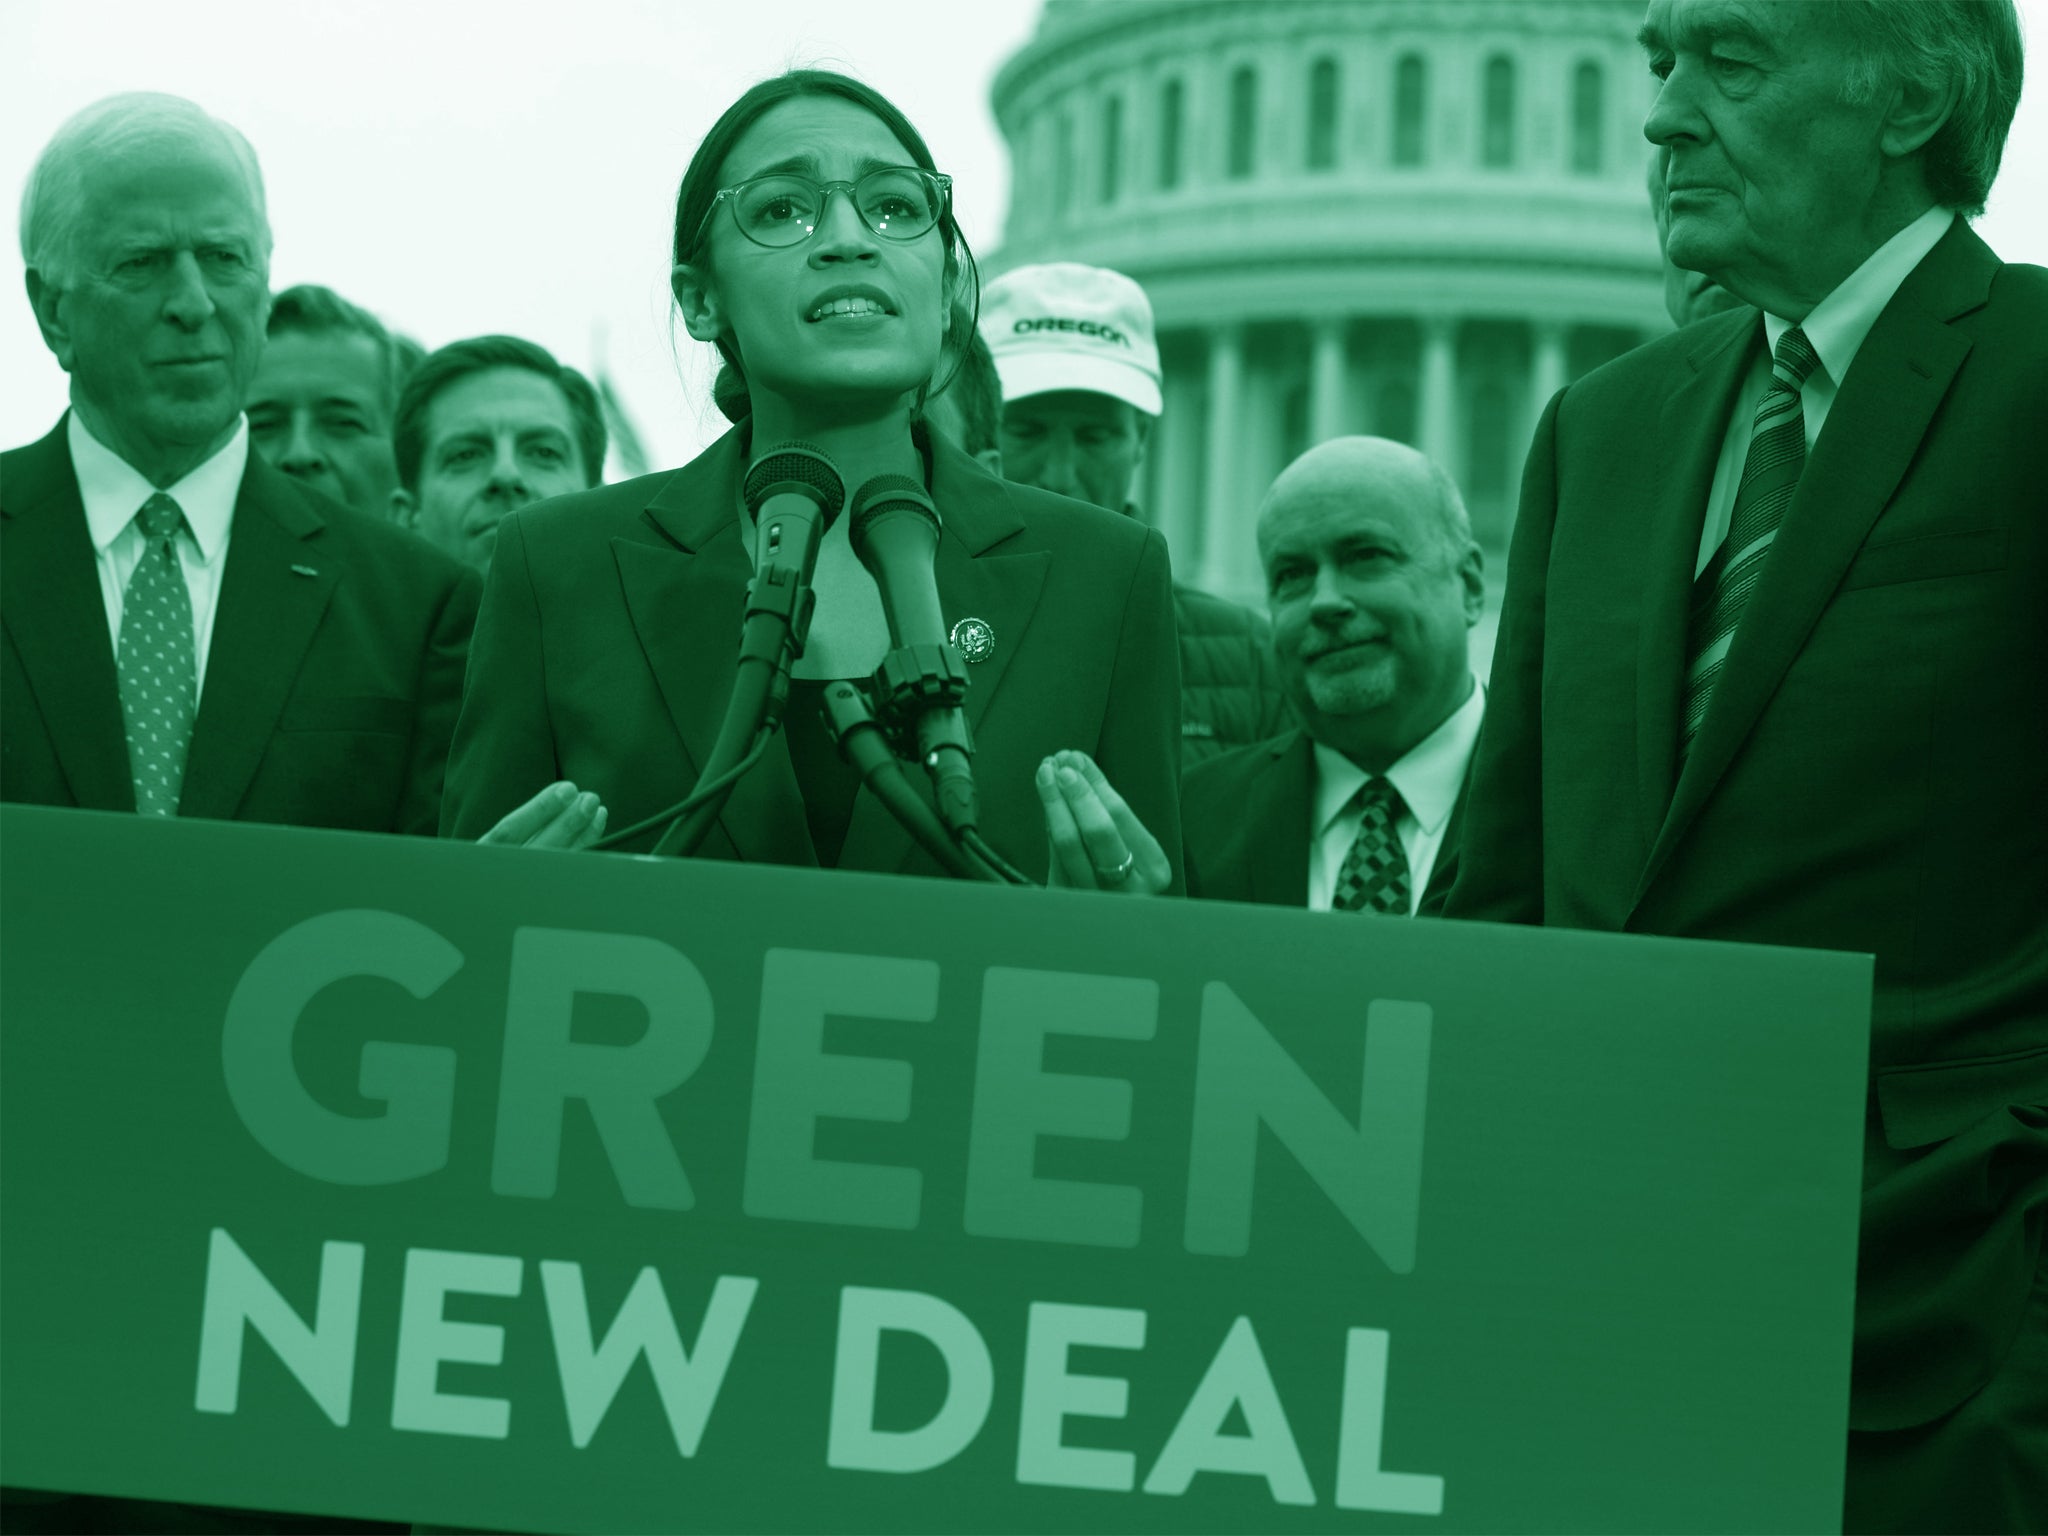 Alexandria Ocasio-Cortez and Ed Markey introduce the Green New Deal resolution on 7 February 2019